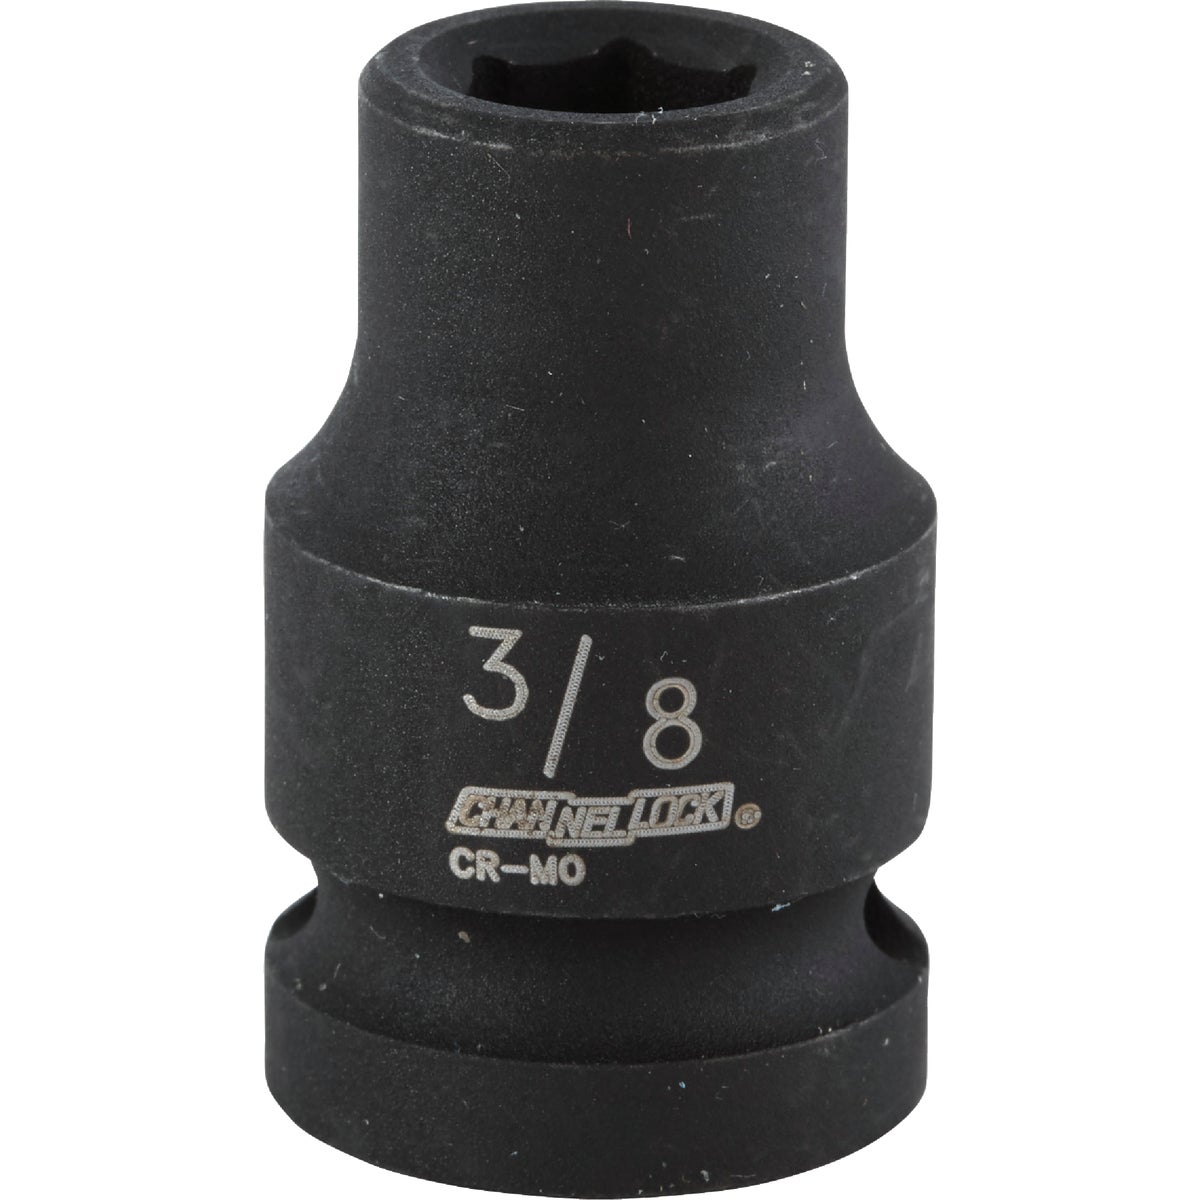 Item 302879, 6-point sockets offer more surface area making them less likely to slip off